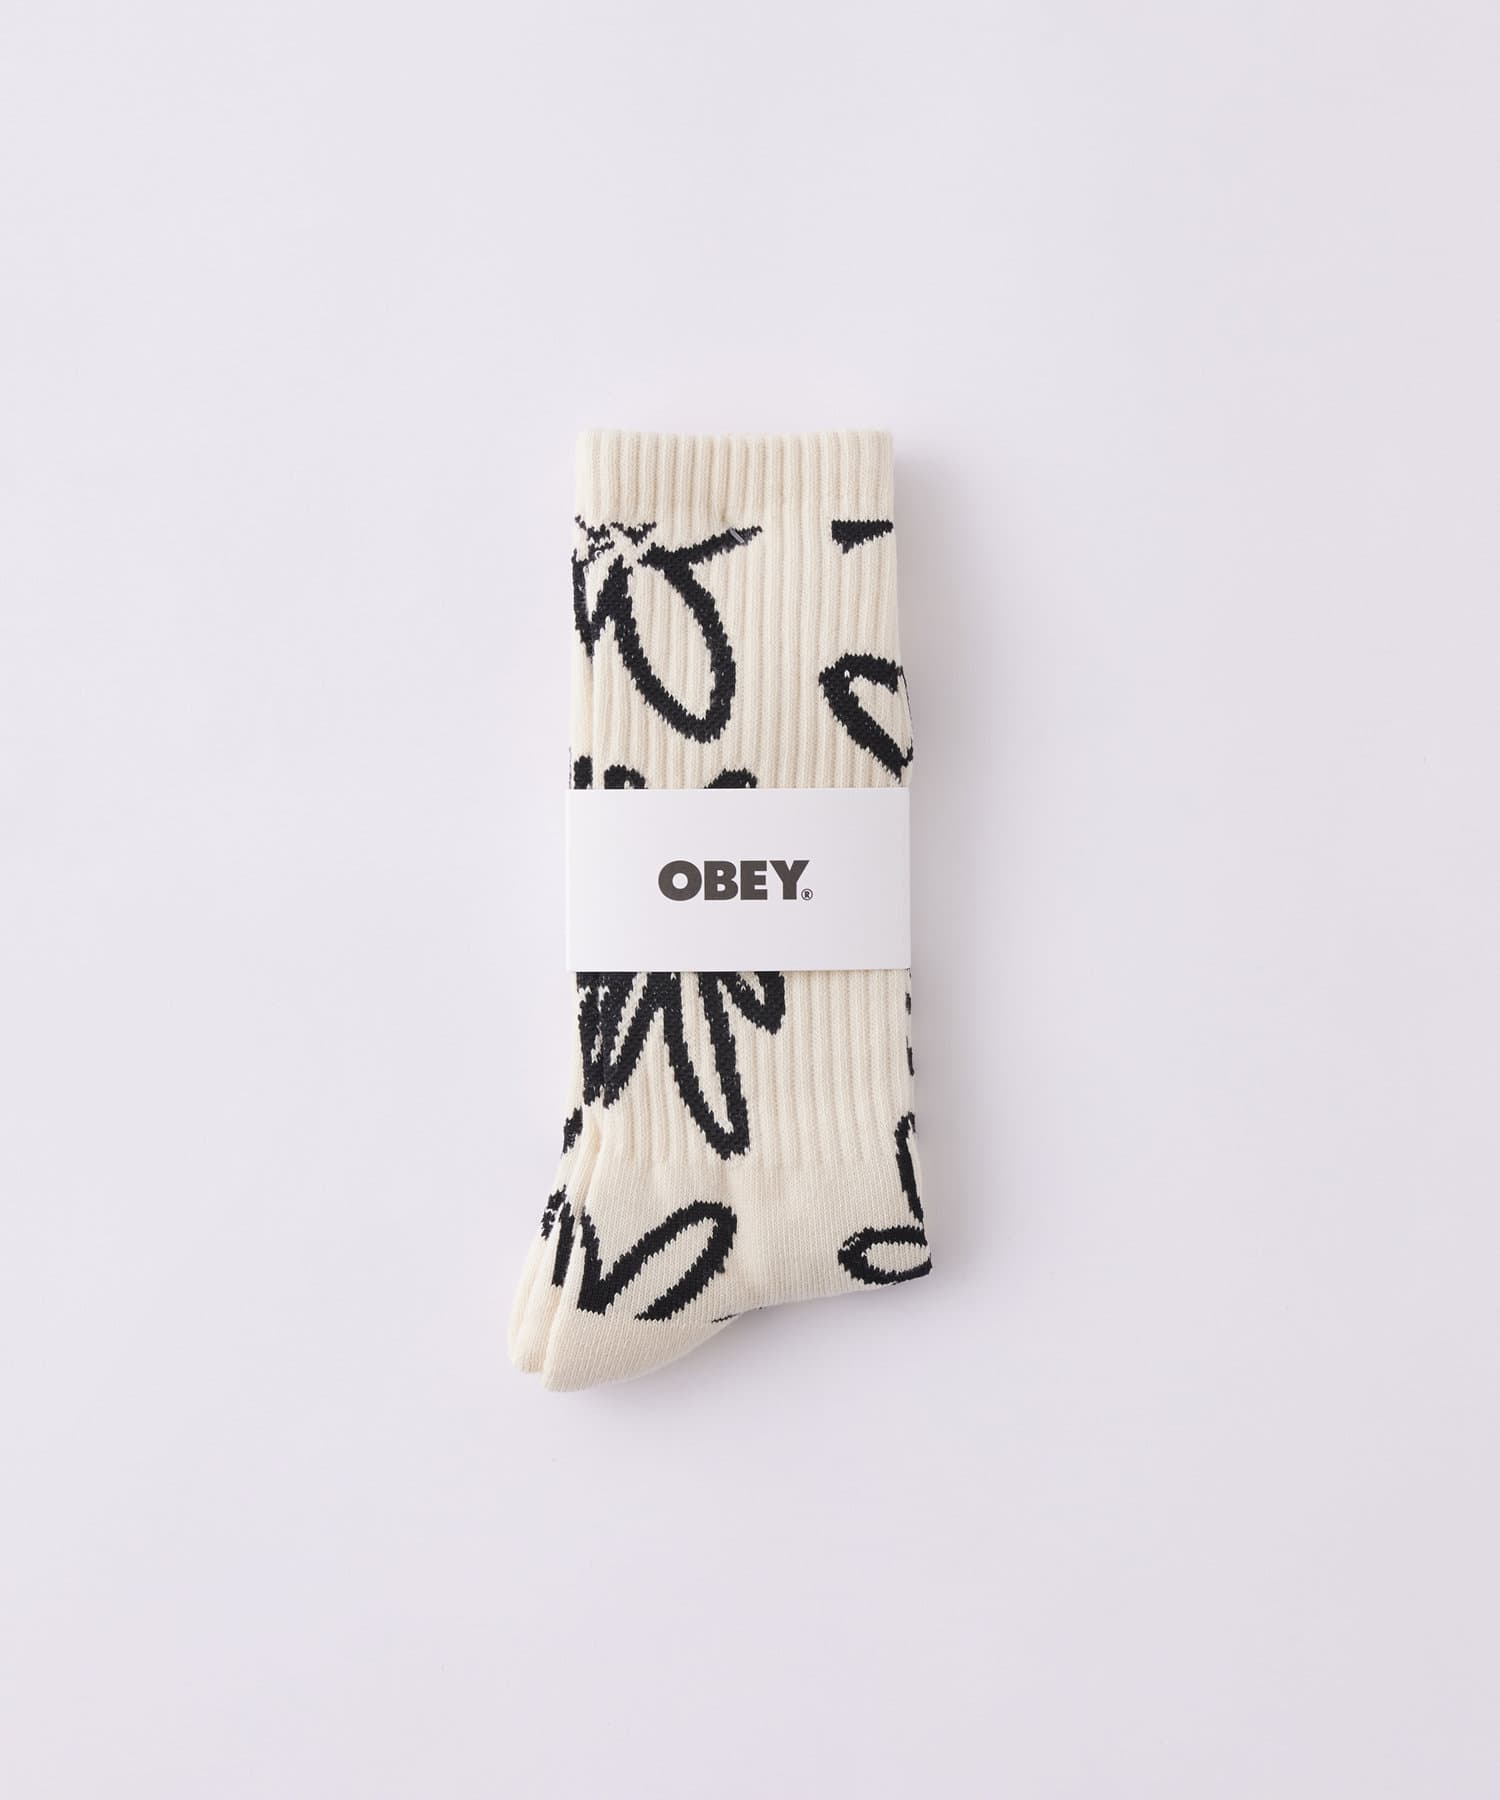 WHO’S WHO gallery(フーズフーギャラリー) OBEY FLORAL SOCKS